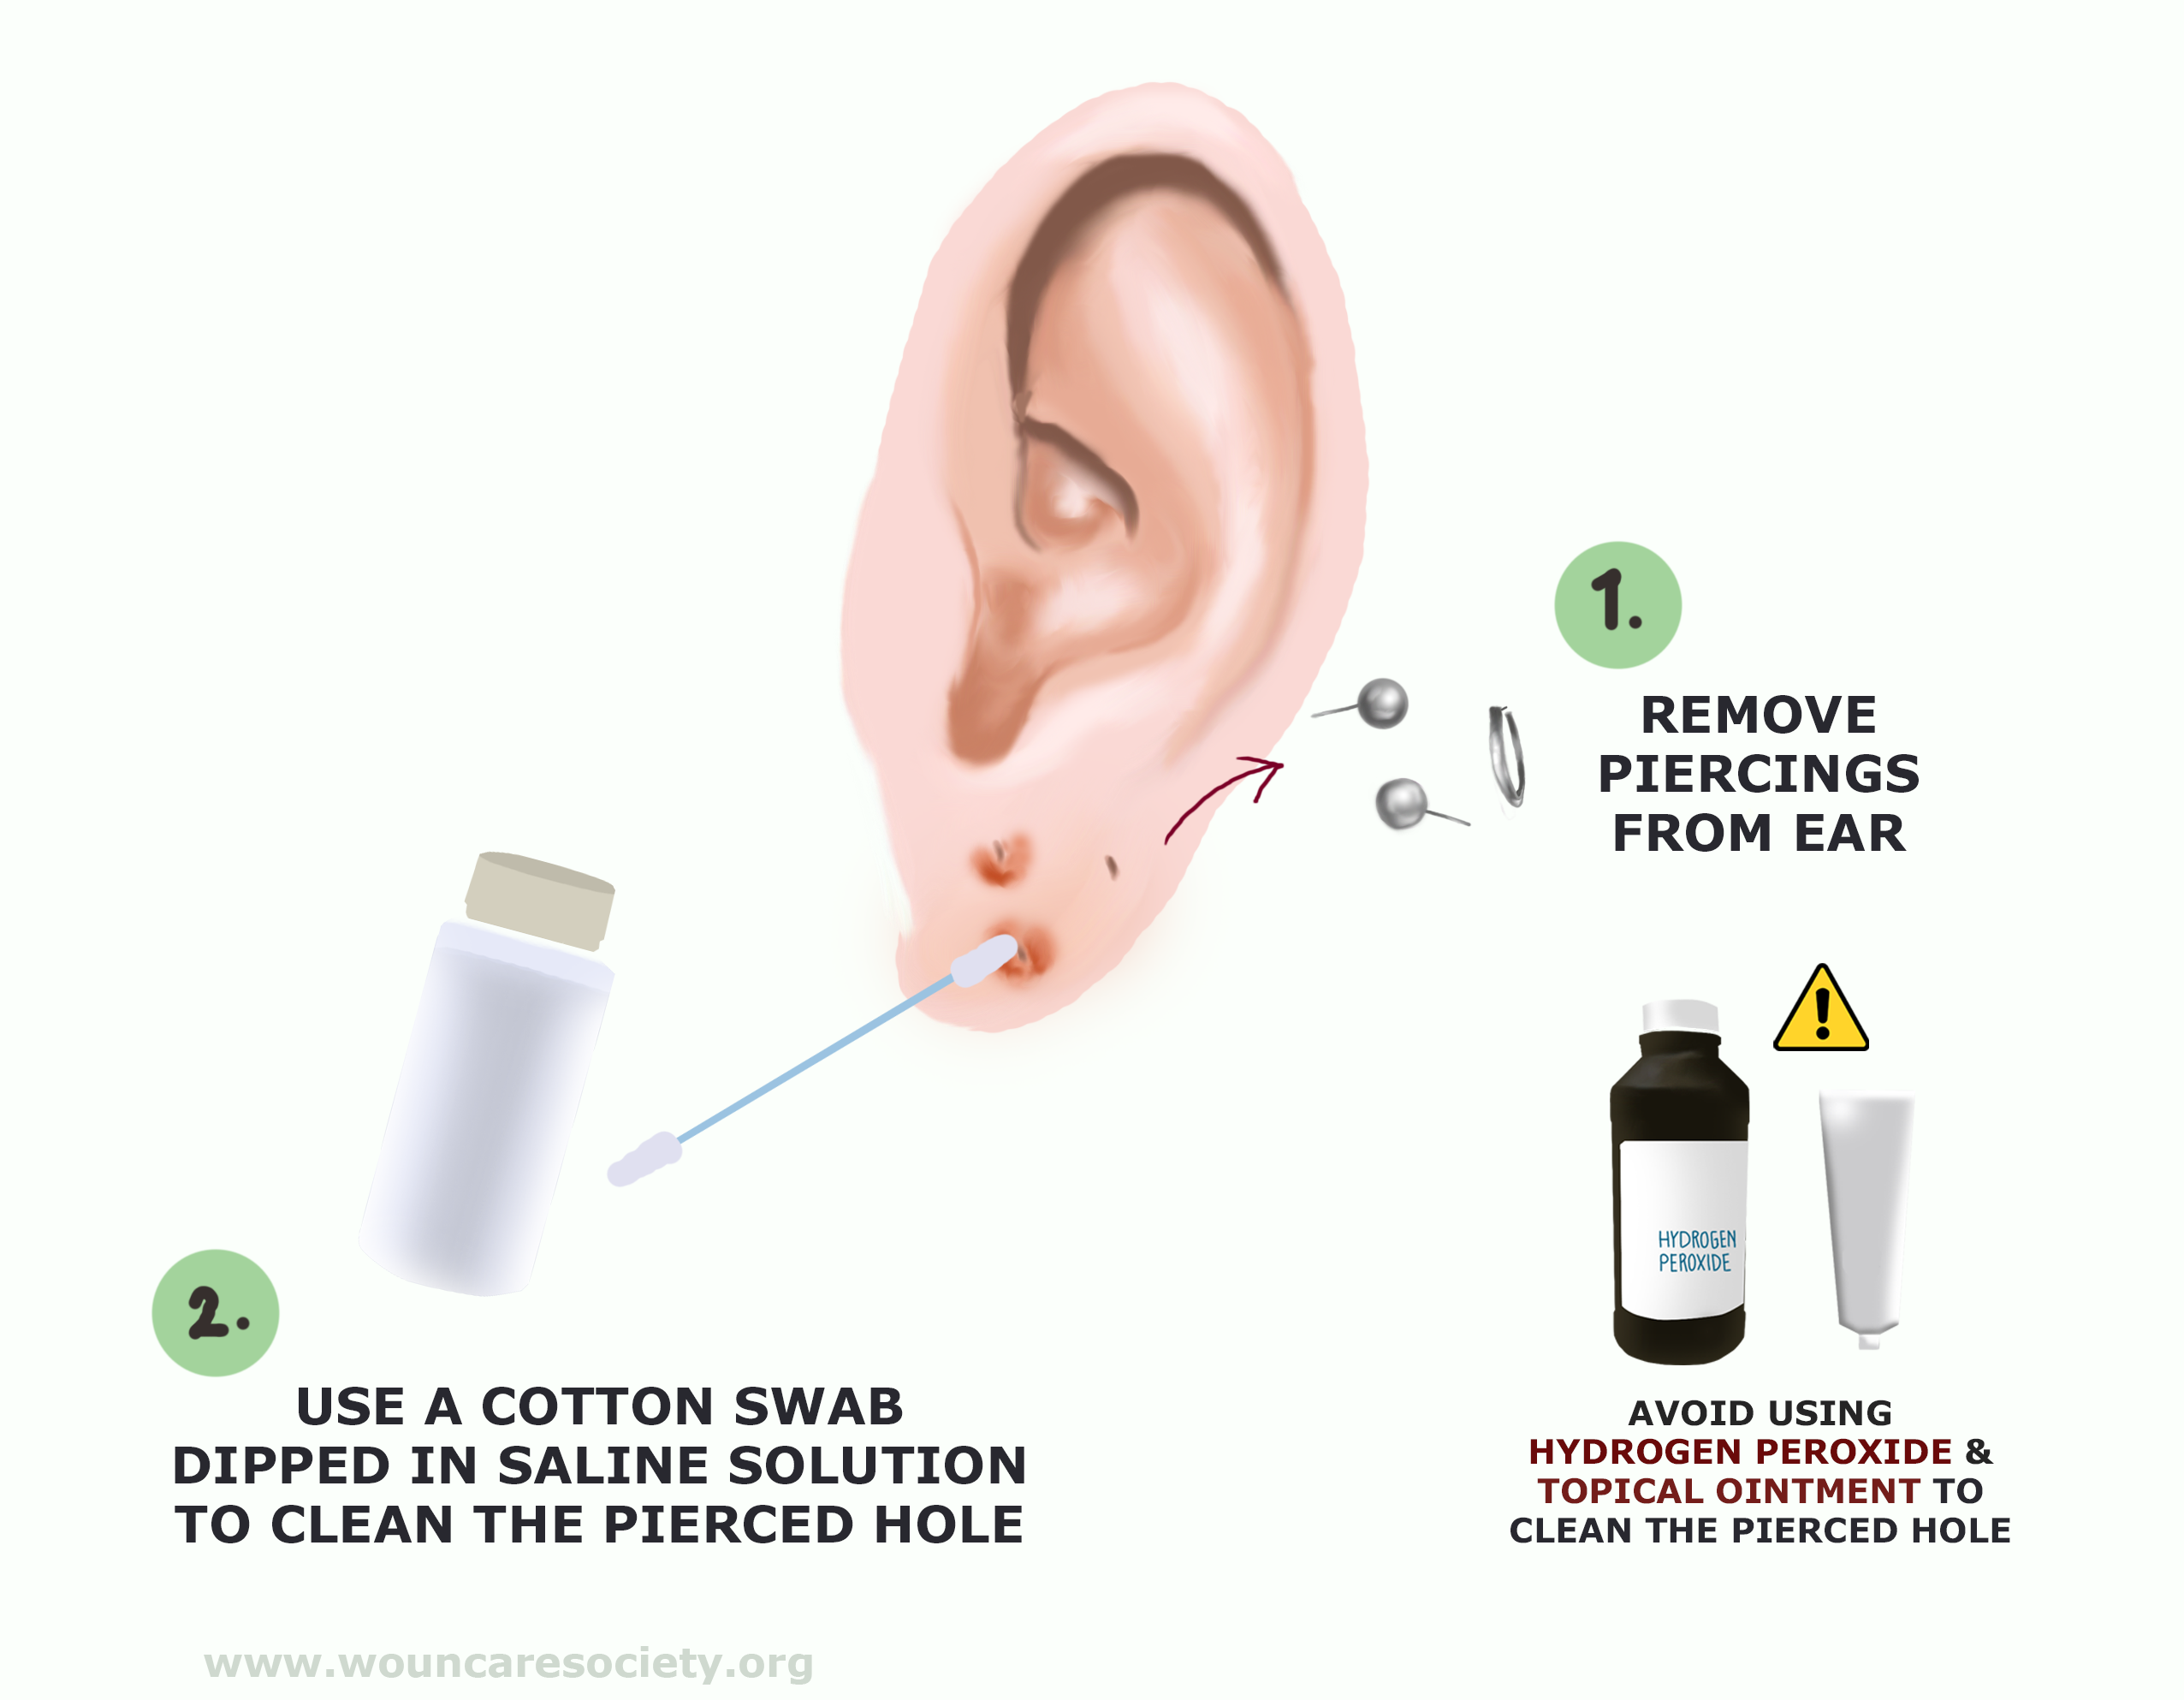 How to drain infected ear piercing